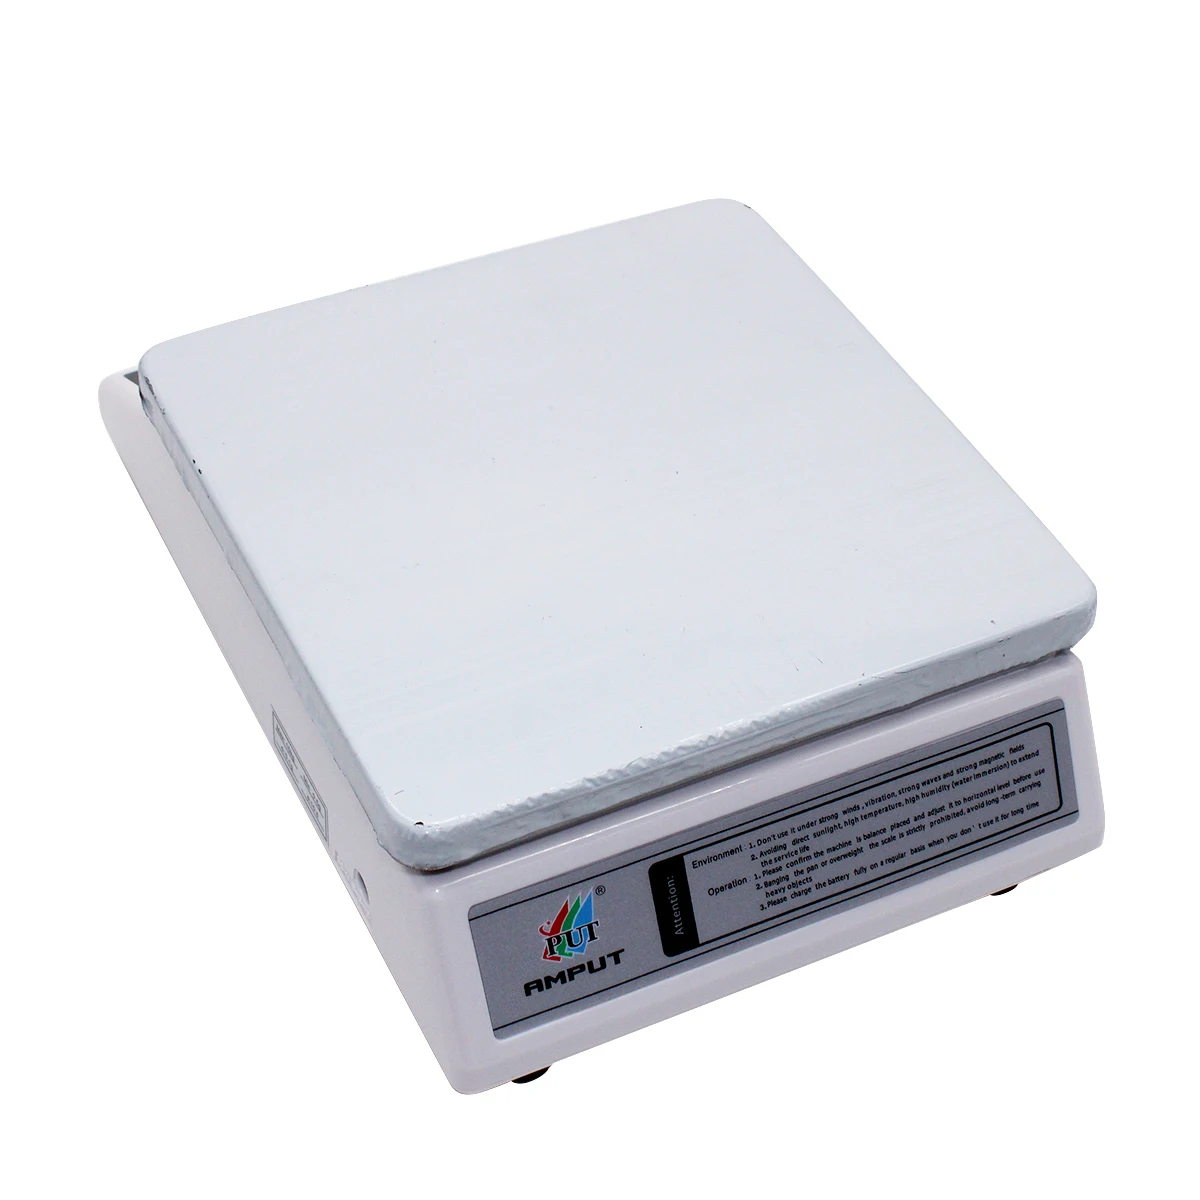 https://ae01.alicdn.com/kf/Ha241763cd2a34337834121713f857cc3e/10kg-x-0-1g-Digital-Precision-Electronic-Laboratory-Balance-Industrial-Weighing-Scale-Balance-w-Counting-Table.jpg